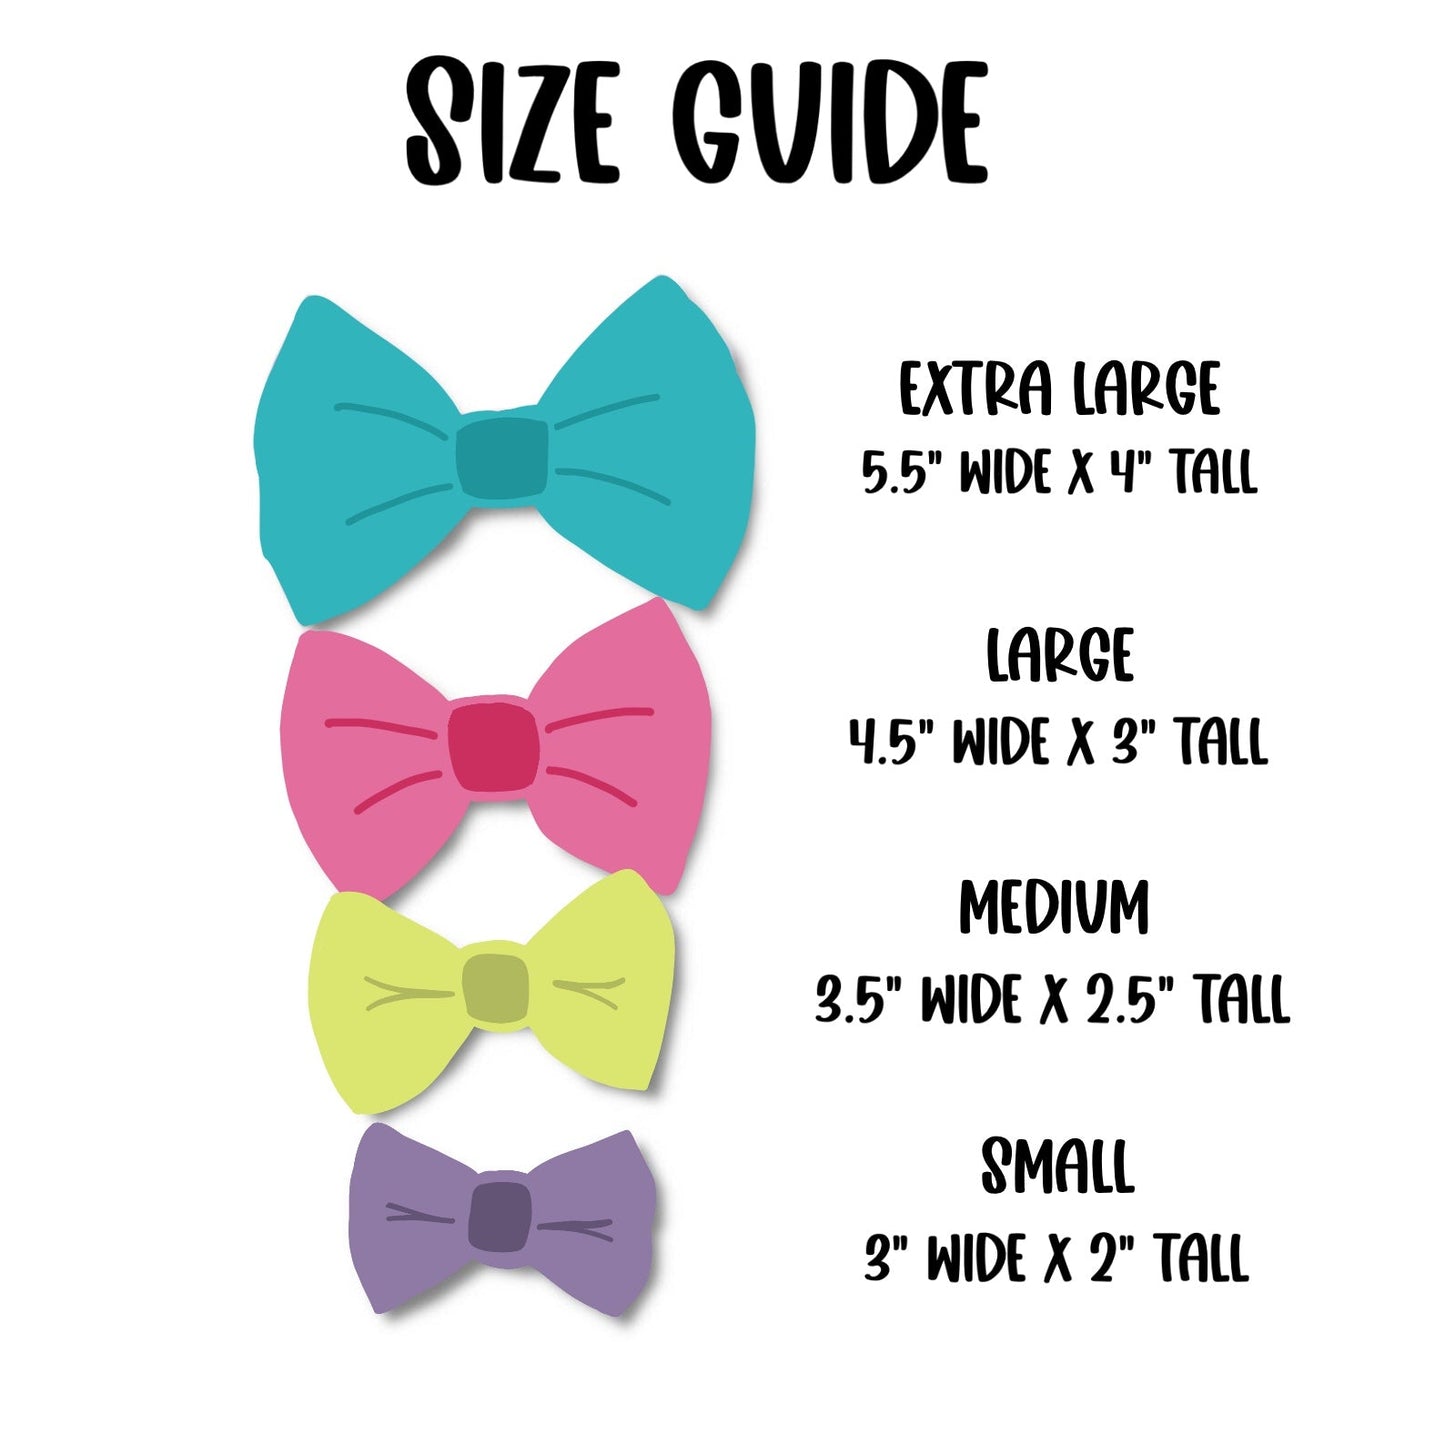 Busy Bee Girly Bow - The Paw Pack Goods